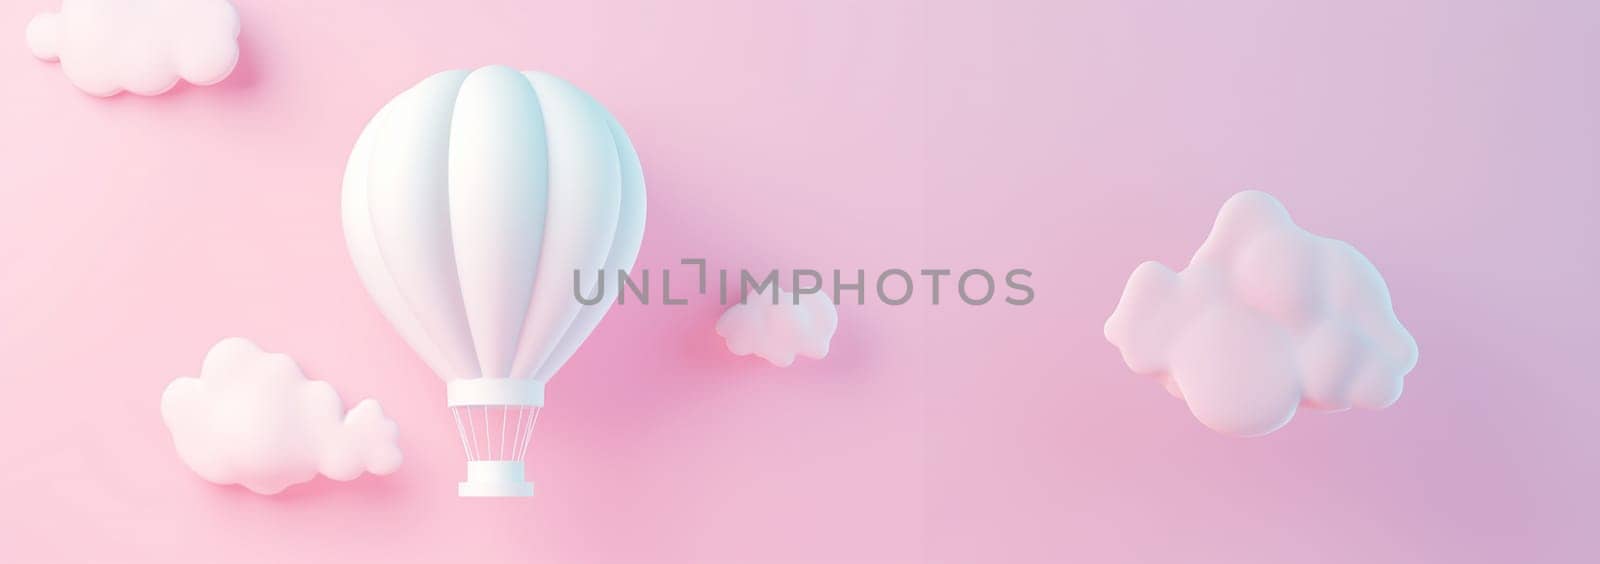 Banner Cute pastel hot air balloon flying in the air. Design illustration of scene with hot air balloons float up in the sky on 3D paper art style. Hot air balloon float up in the sky. pastel paper cut and craft style illustration. Pink,purple and blue color Copy space by Annebel146